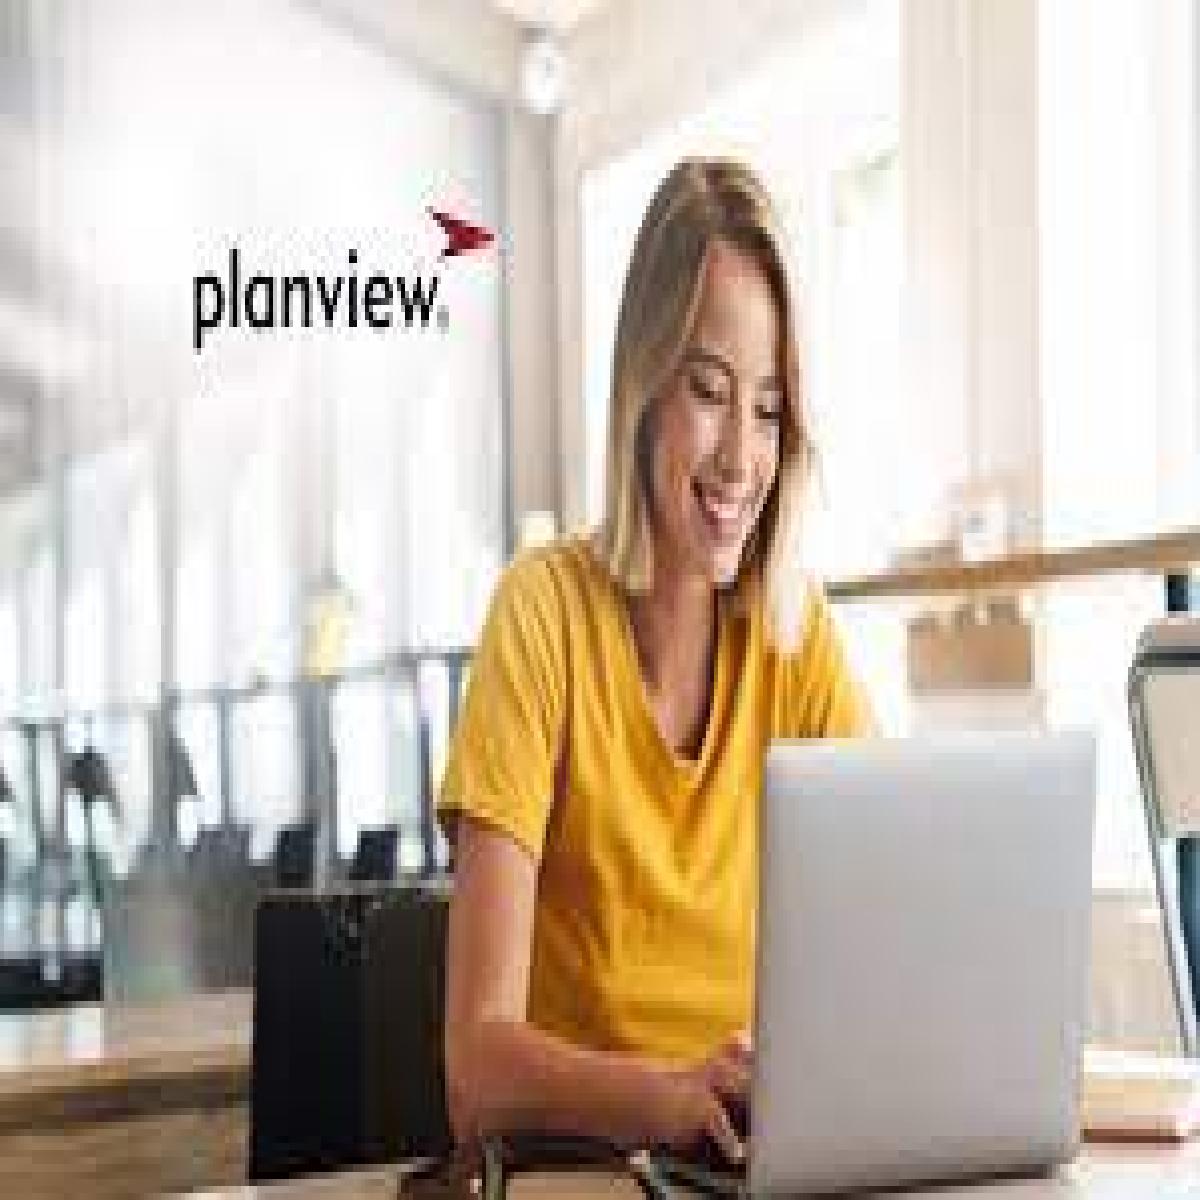 Planview Selects AWS as Its Preferred Public Cloud Provider